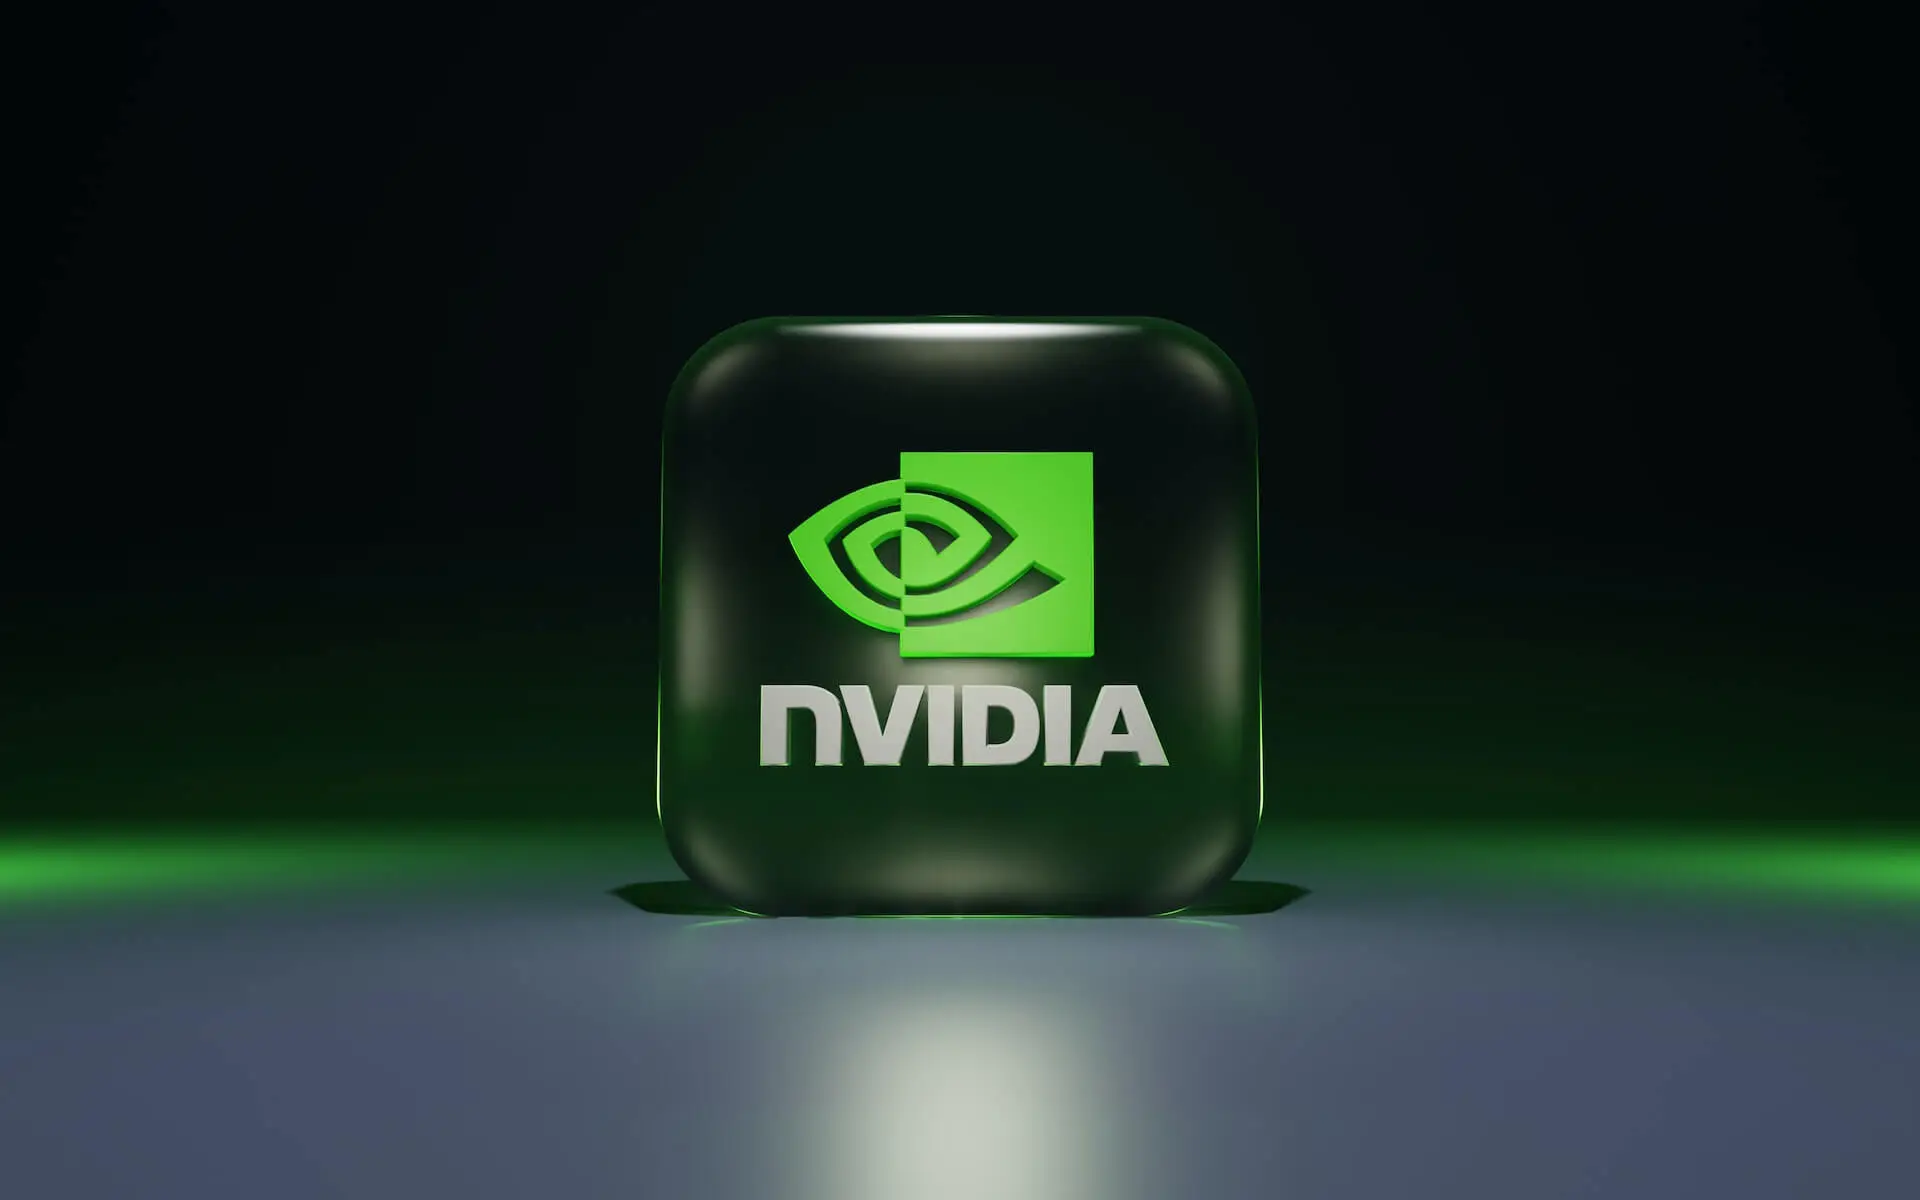 The Omniverse Platform of Nvidia Is a Great Platform for Designers and Creators to Help Them with Their Jobs